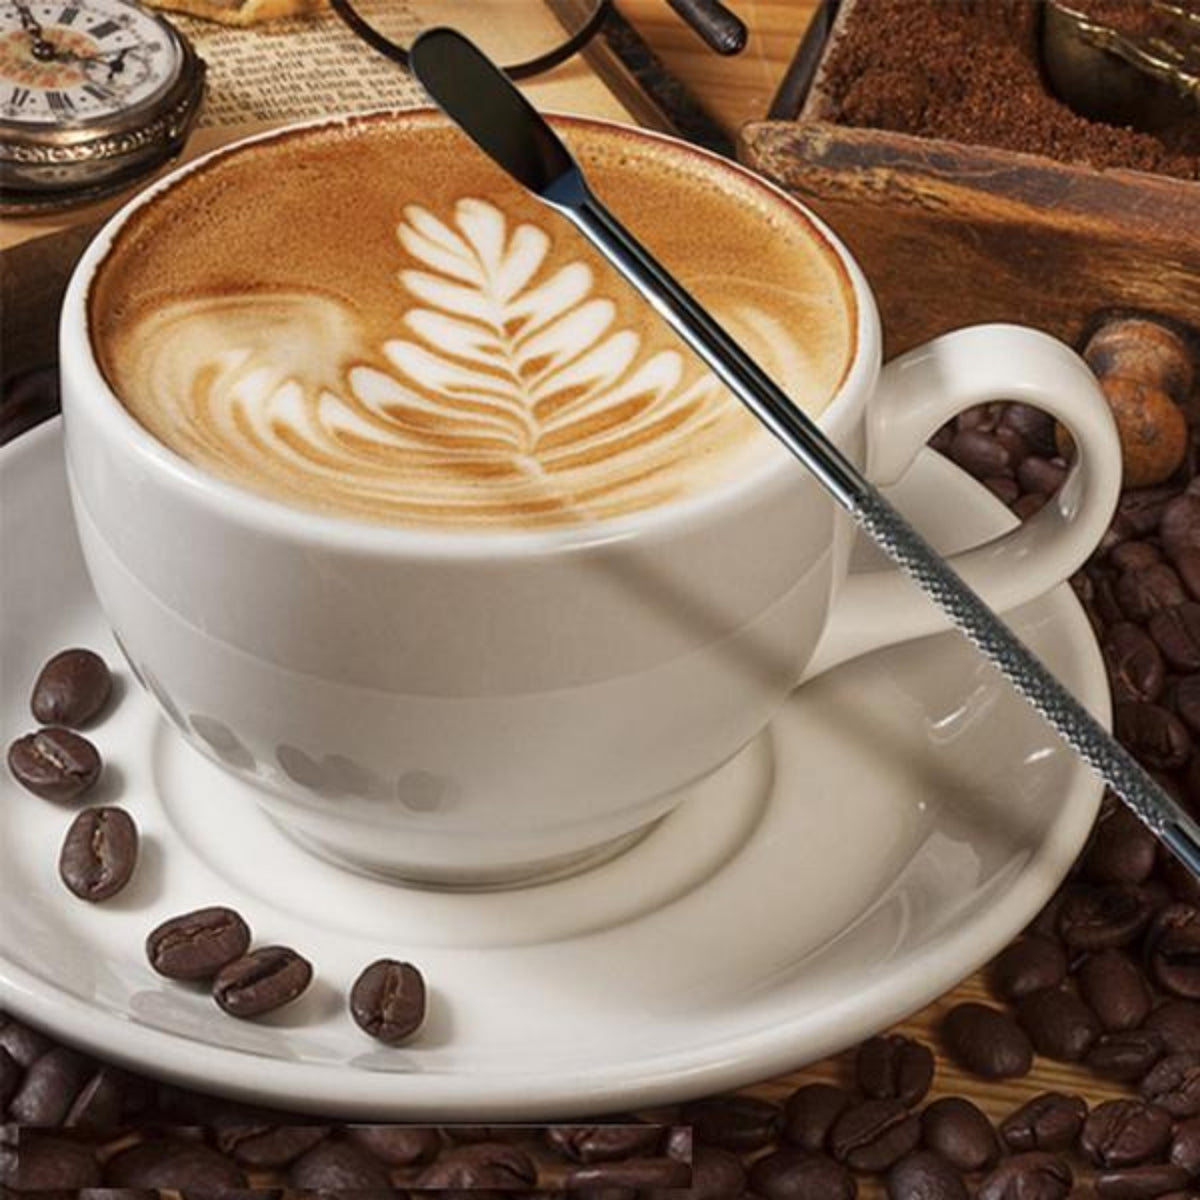 LATTE ART PEN: your ally to amaze with a cappuccino. Discover the